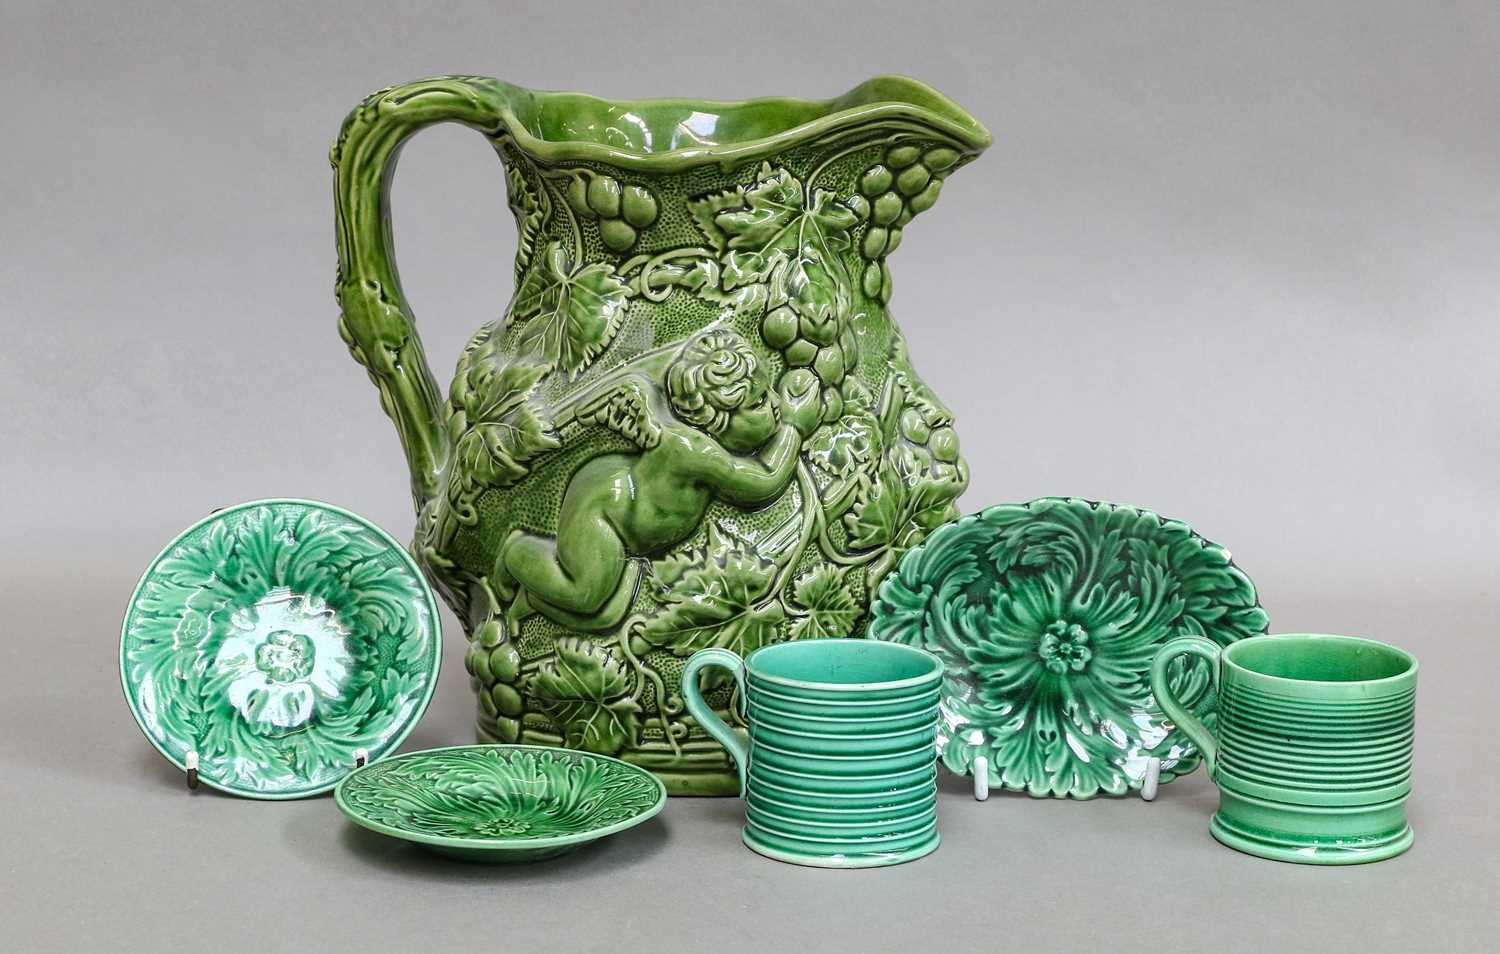 A Minton's Majolica jug, shape number 589, decorated with putto and vines, together with a group